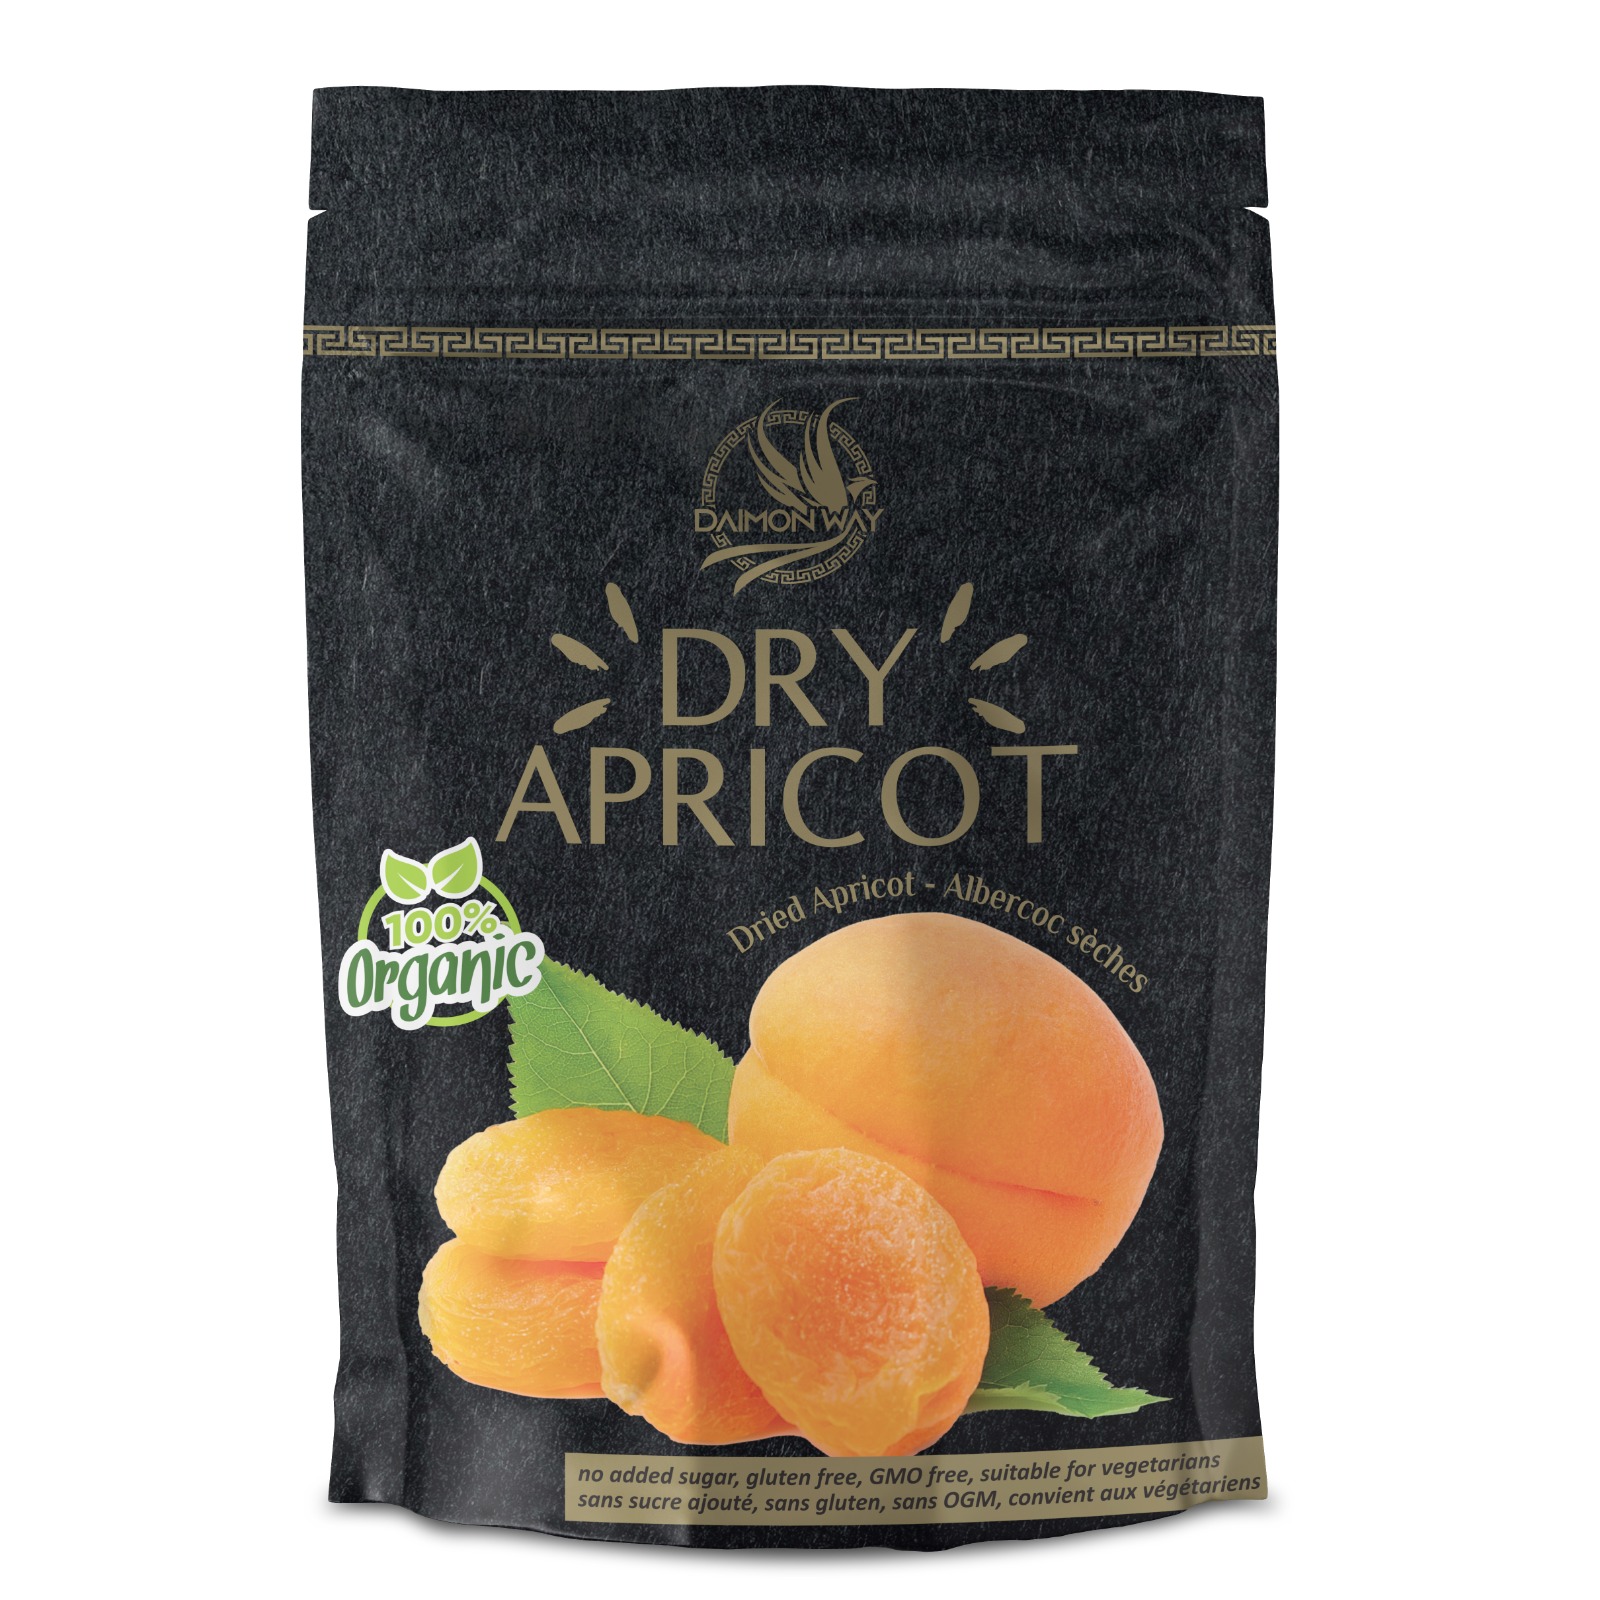 02- DOYPACK Organic Dried Apricots